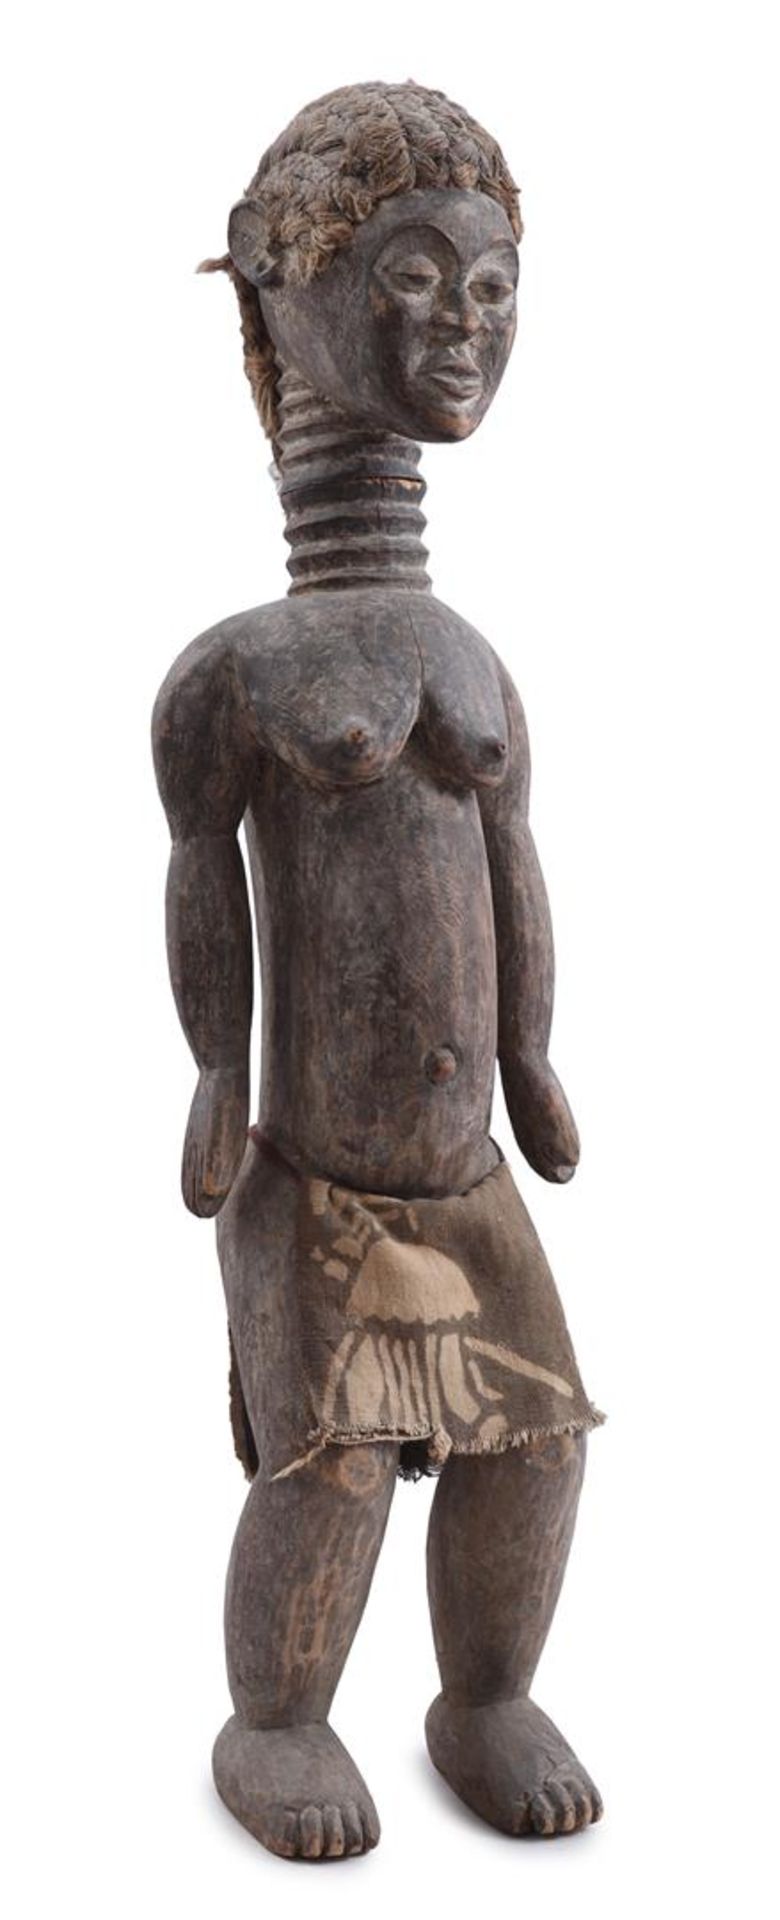 Ceremonial wooden statue, Mossi tribe